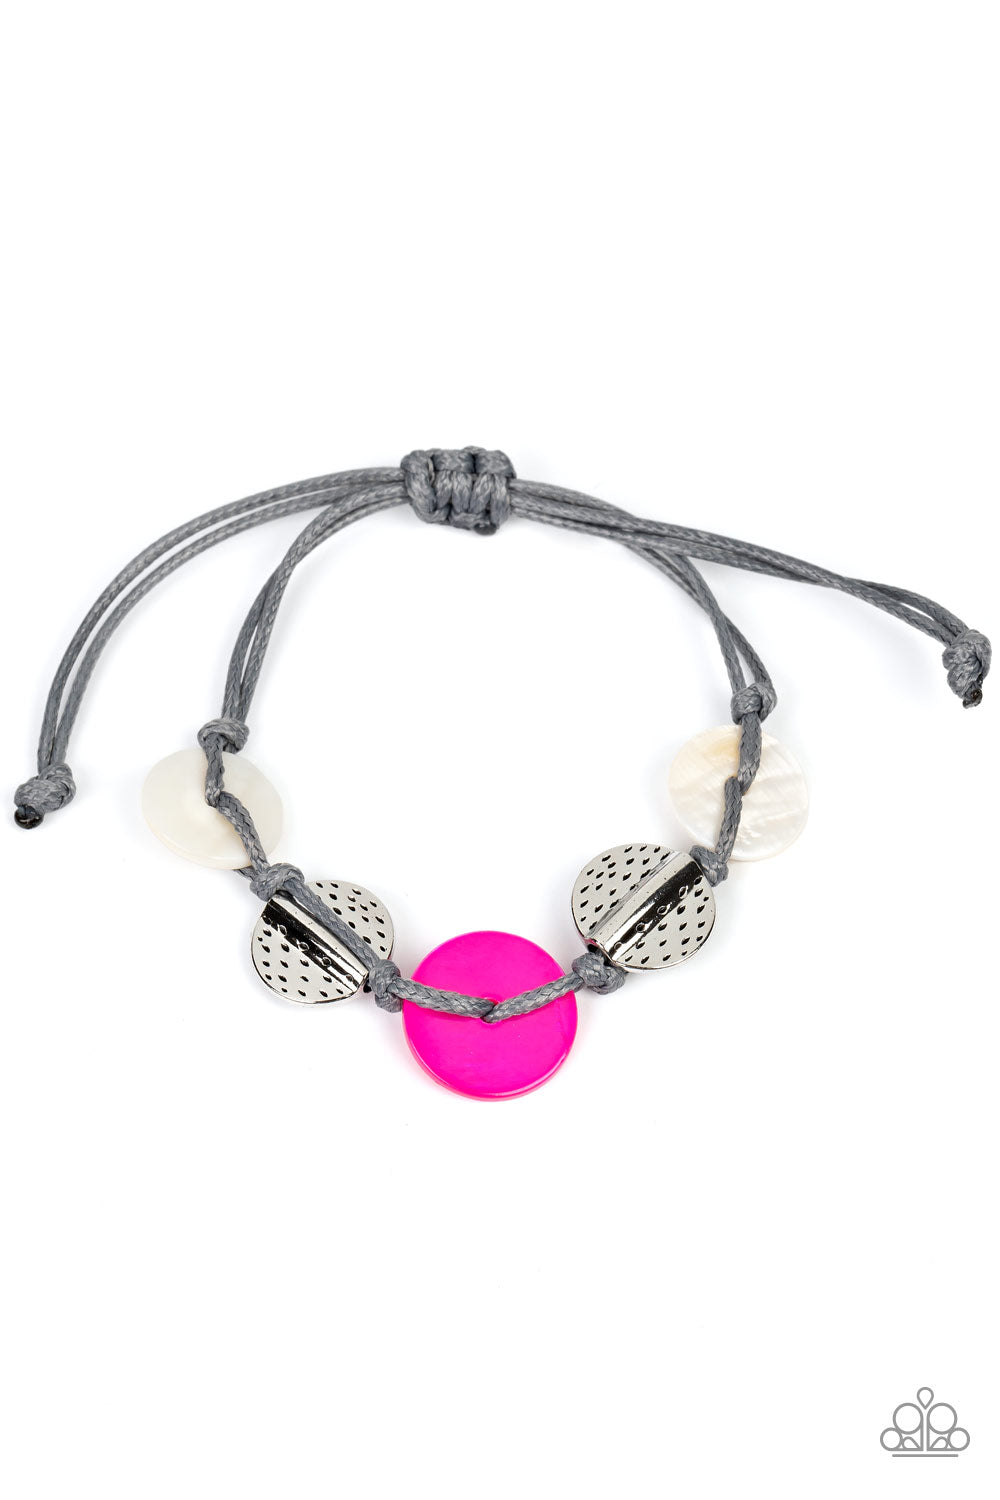 Shore Up - Pink Shell and Silver Bracelet - Paparazzi Accessories - Vibrant pink and white shells interlace with silver dotted, hammered discs to create a refined pop of color. Held together by soft gray cording, this piece will blend in with beaches near you! Features an adjustable sliding knot closure. Sold as one individual bracelet.